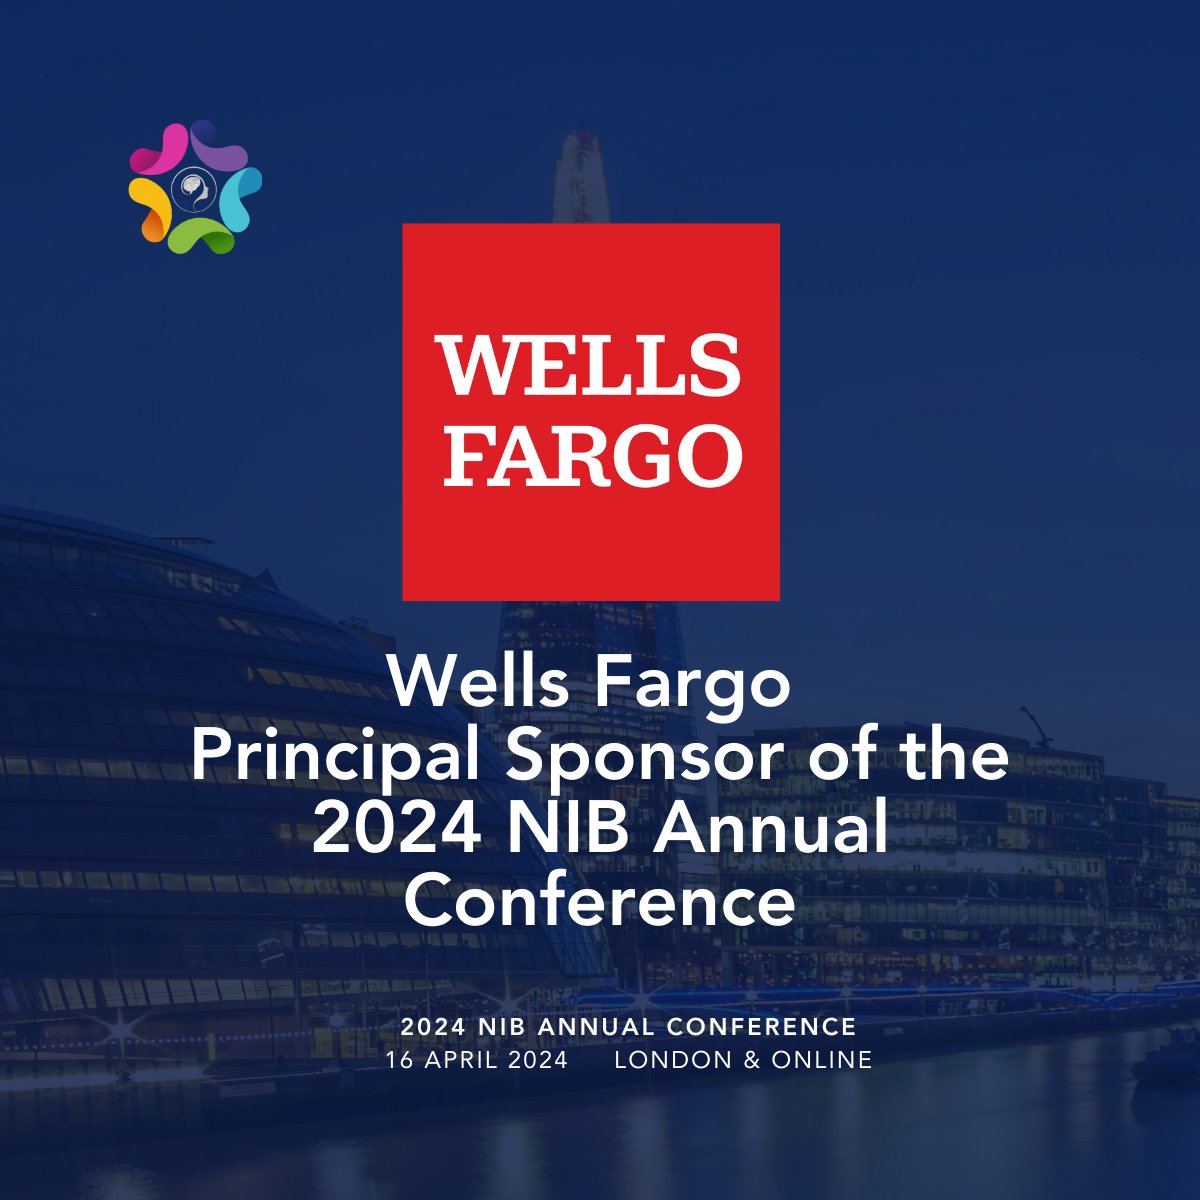 #TeamNiB are delighted to announce @wellsfargo as Principal Sponsor for our 2024 NiB Annual Conference! Visit this link to find out more and buy your tickets: Bit.ly/NiBConference2… #Neurodiversity #NeurodiversityInBusiness